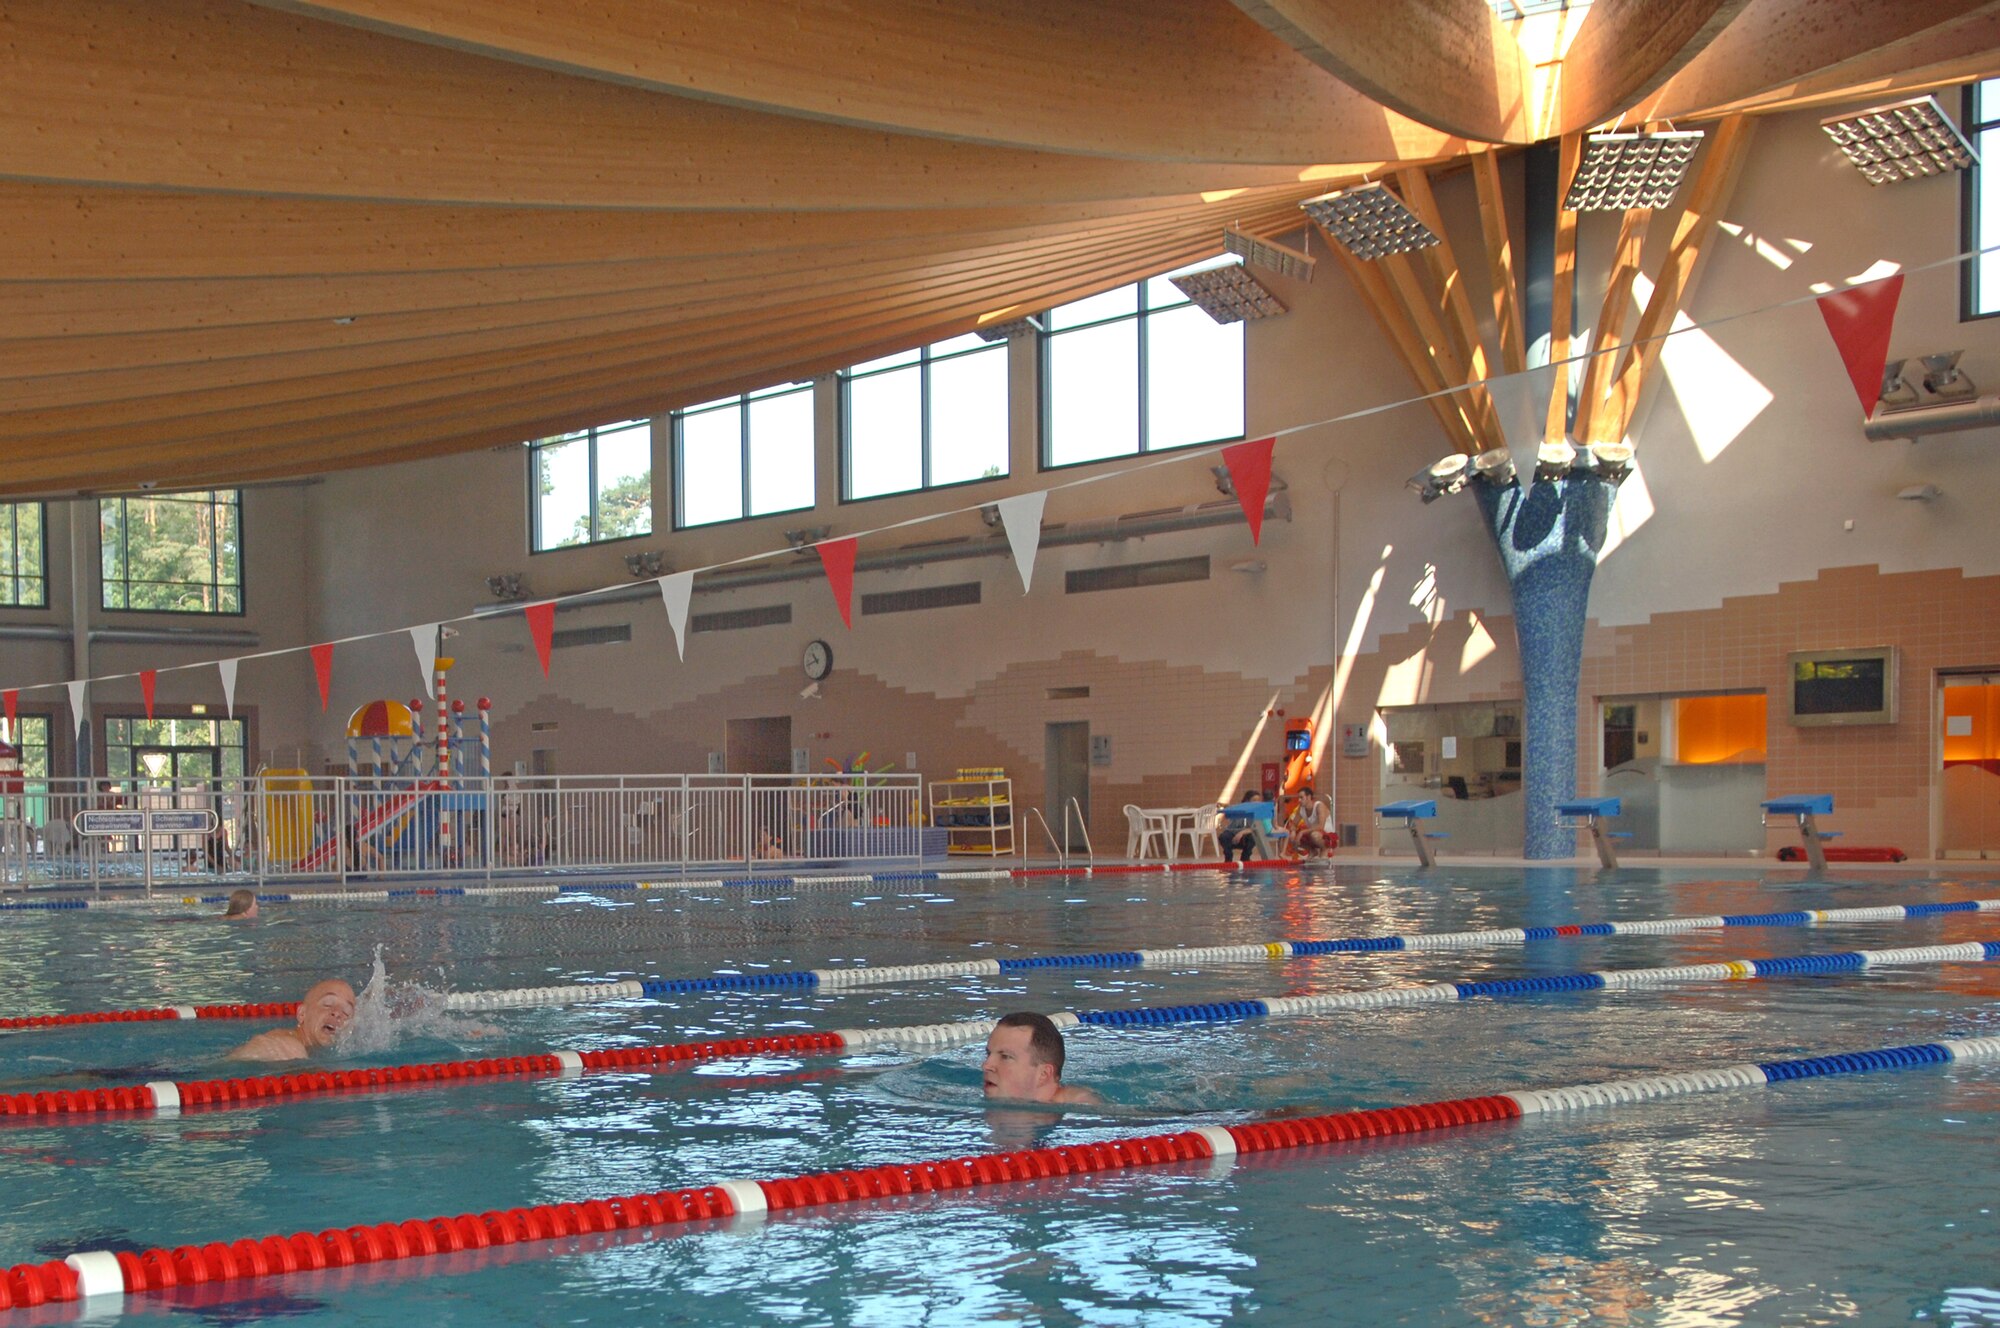 The Ramstein Aquatic Center opens its doors to patrons during a 'soft opening' from 26-28 Aug., Ramstein Air Base, Germany, Aug. 27, 2008. The 'soft opening' allows patrons to dive in and preview the facilities before it officially opens. (U.S. Air Force photo by Airman 1st Class Tony R. Ritter)(Released)*